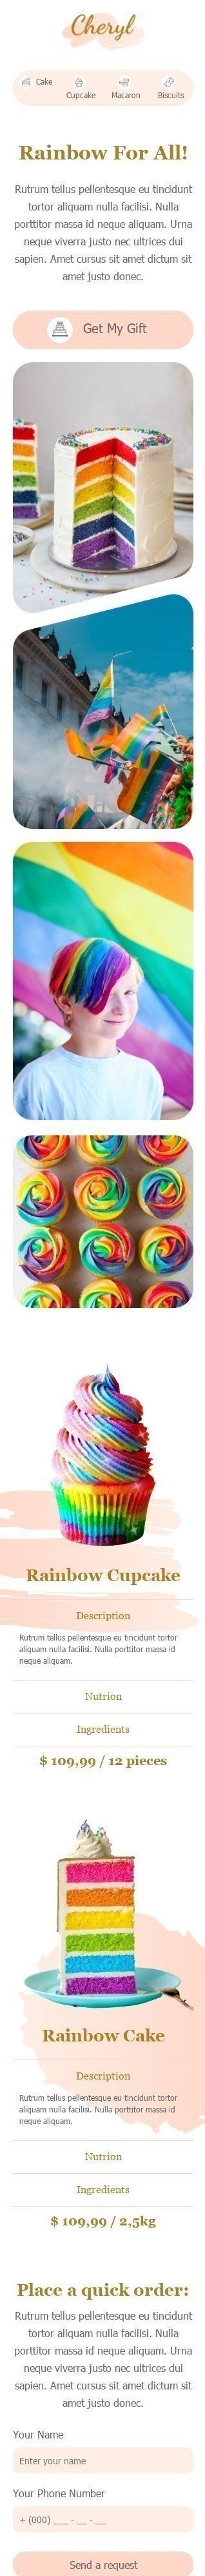 LGBTQ Pride Month Email Template "Rainbow for all" for Food industry mobile view